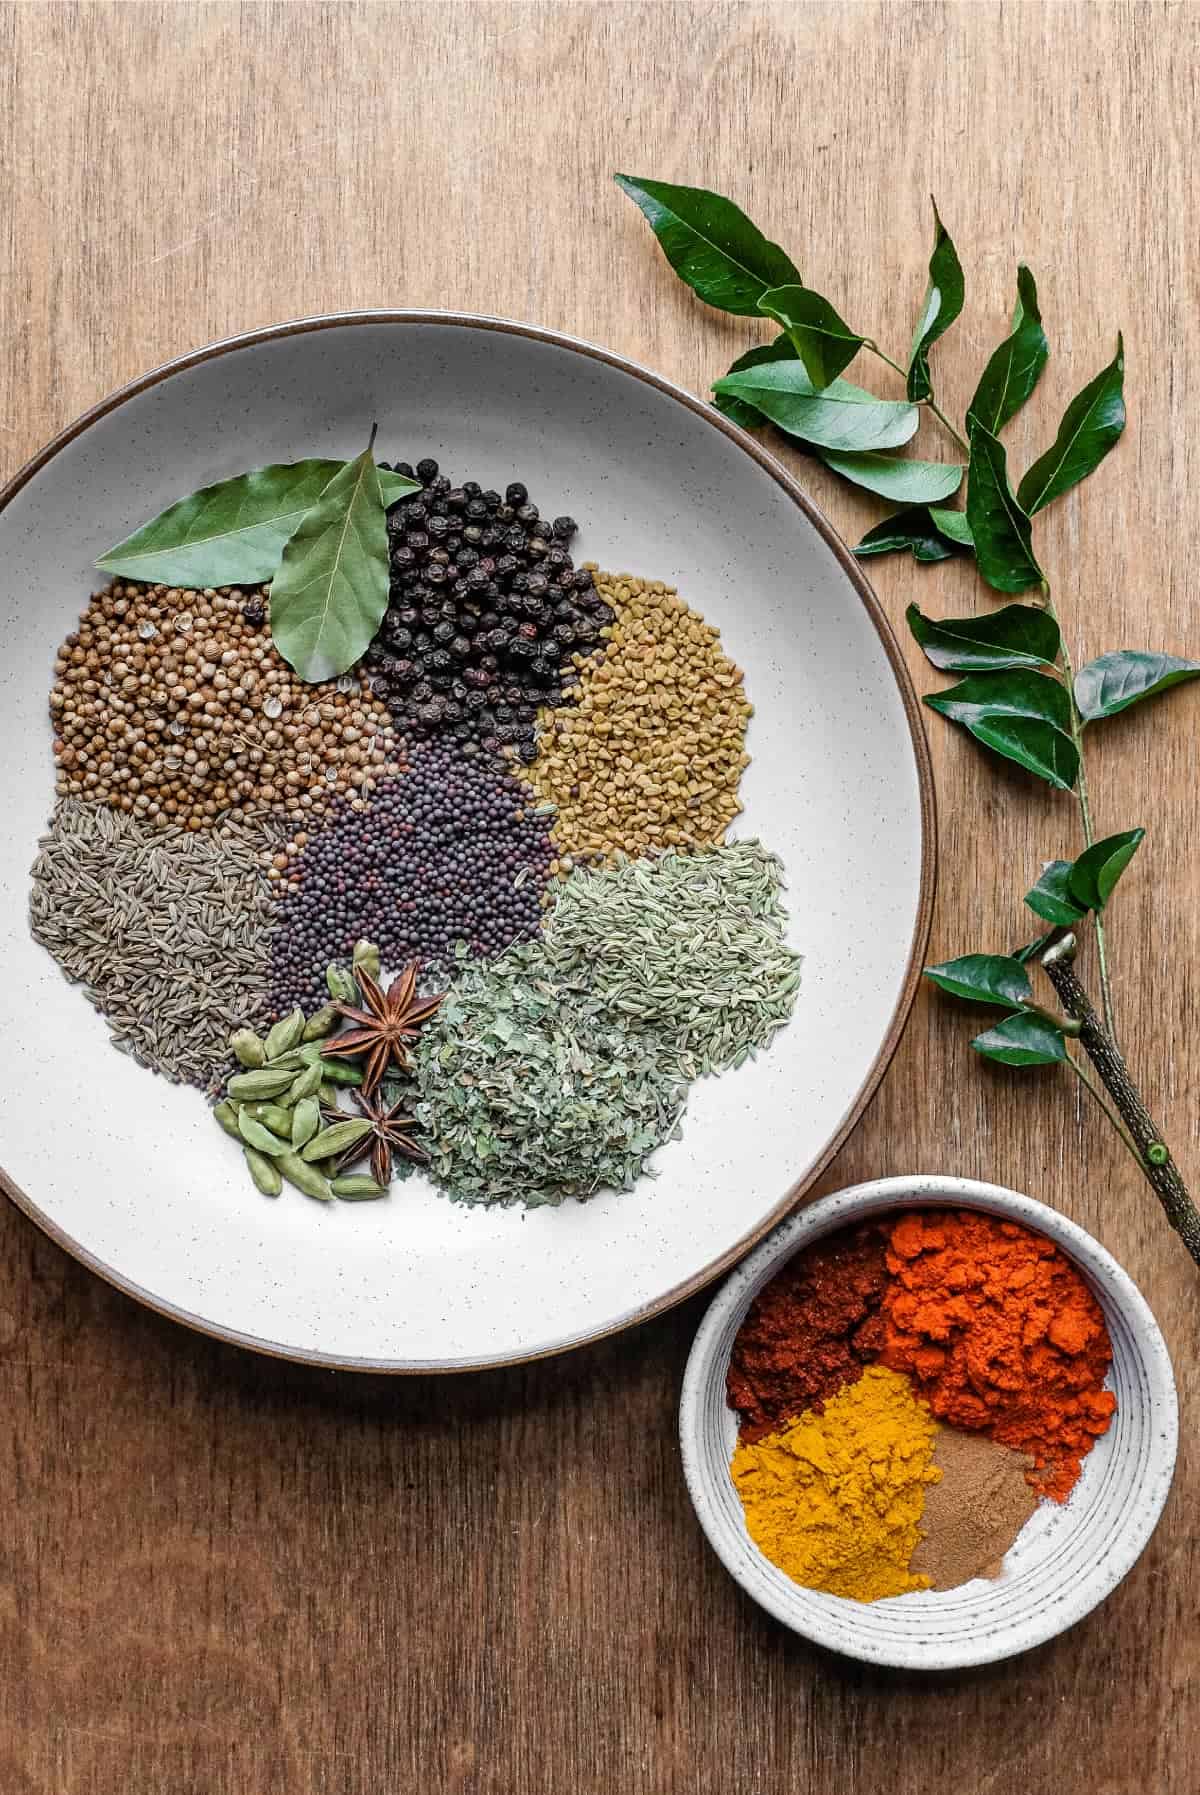 The ingredients of whole and ground spices plus a branch of fresh curry leaves on a wooden surface.